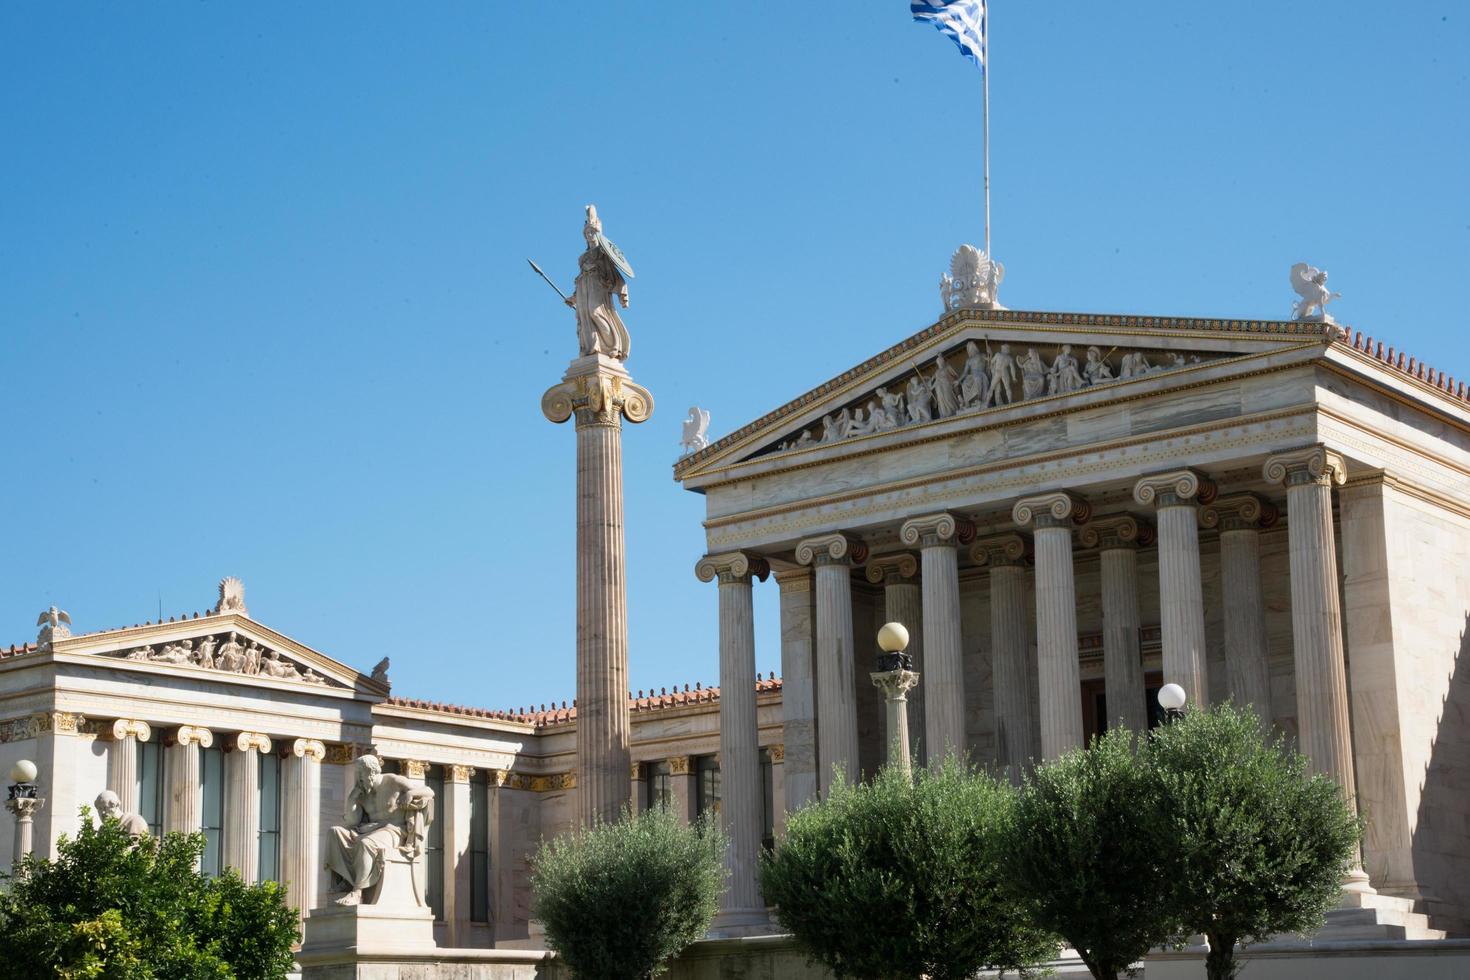 Academy of Athens neoclassical building with statues, flag and blue sky photo